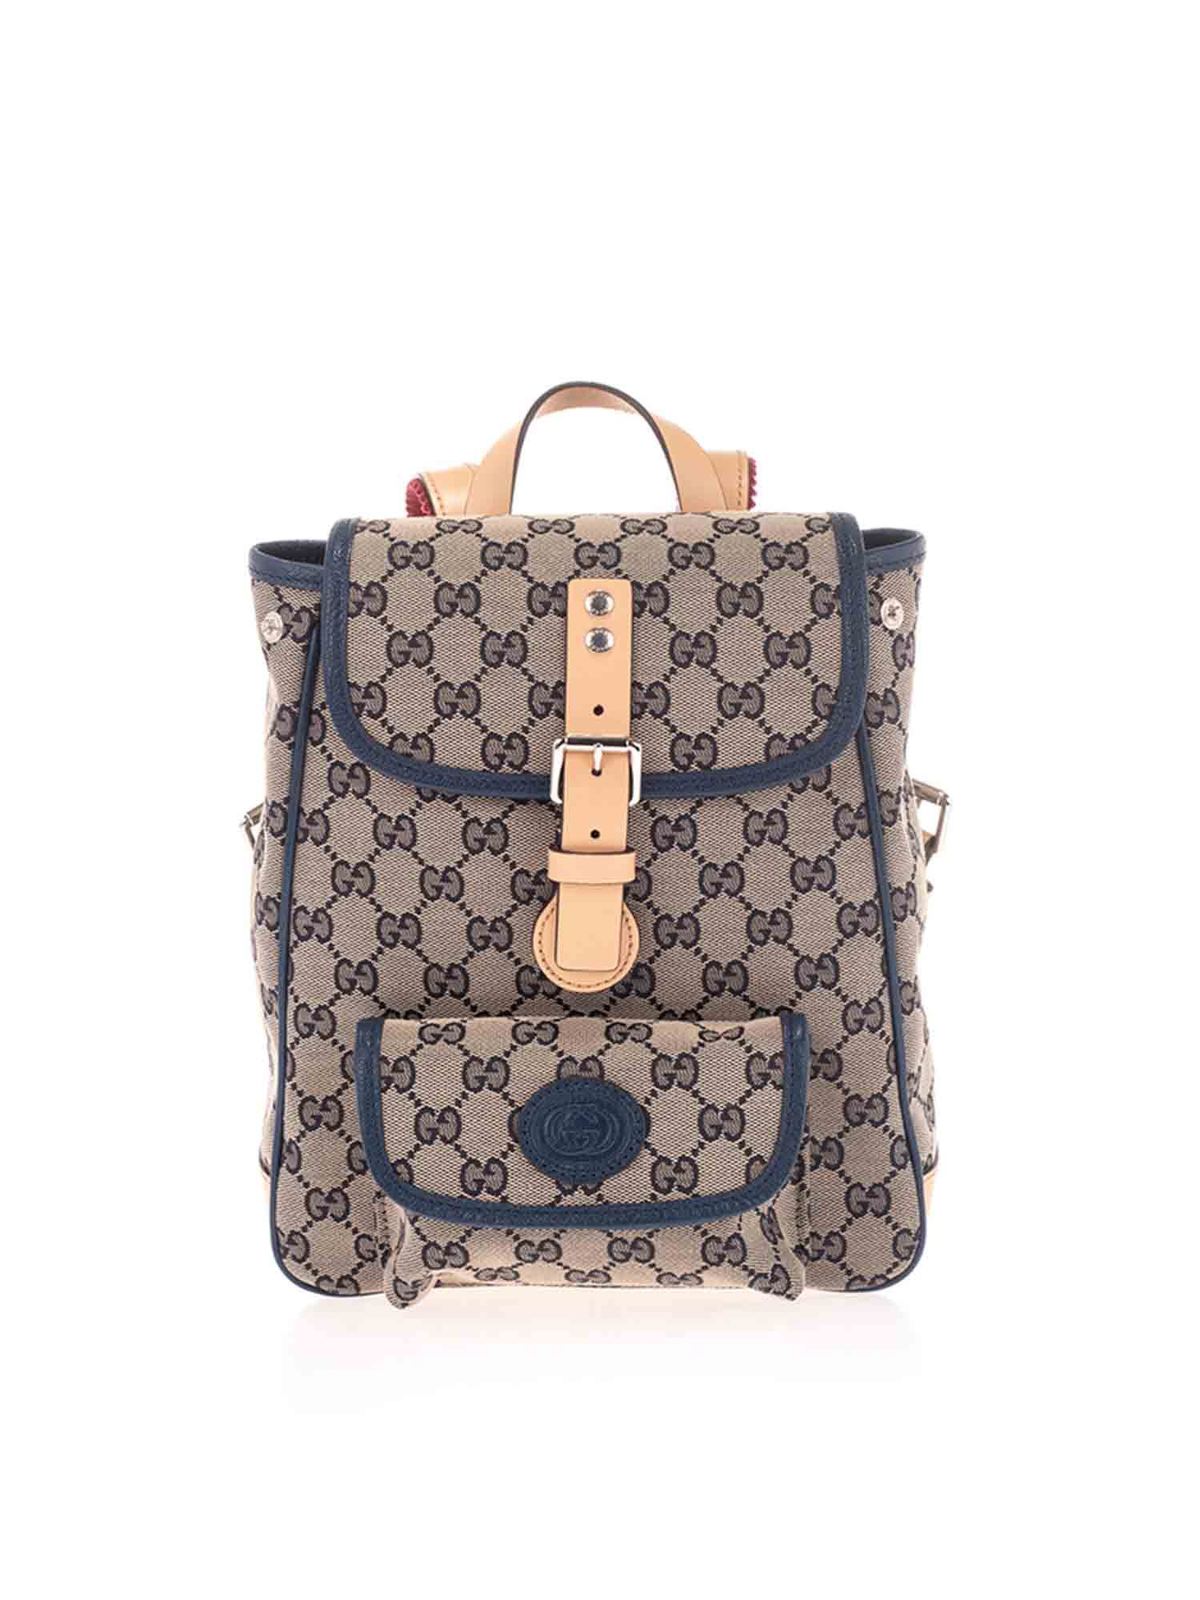 GUCCI BACKPACK WITH GG MOTIF IN GREY